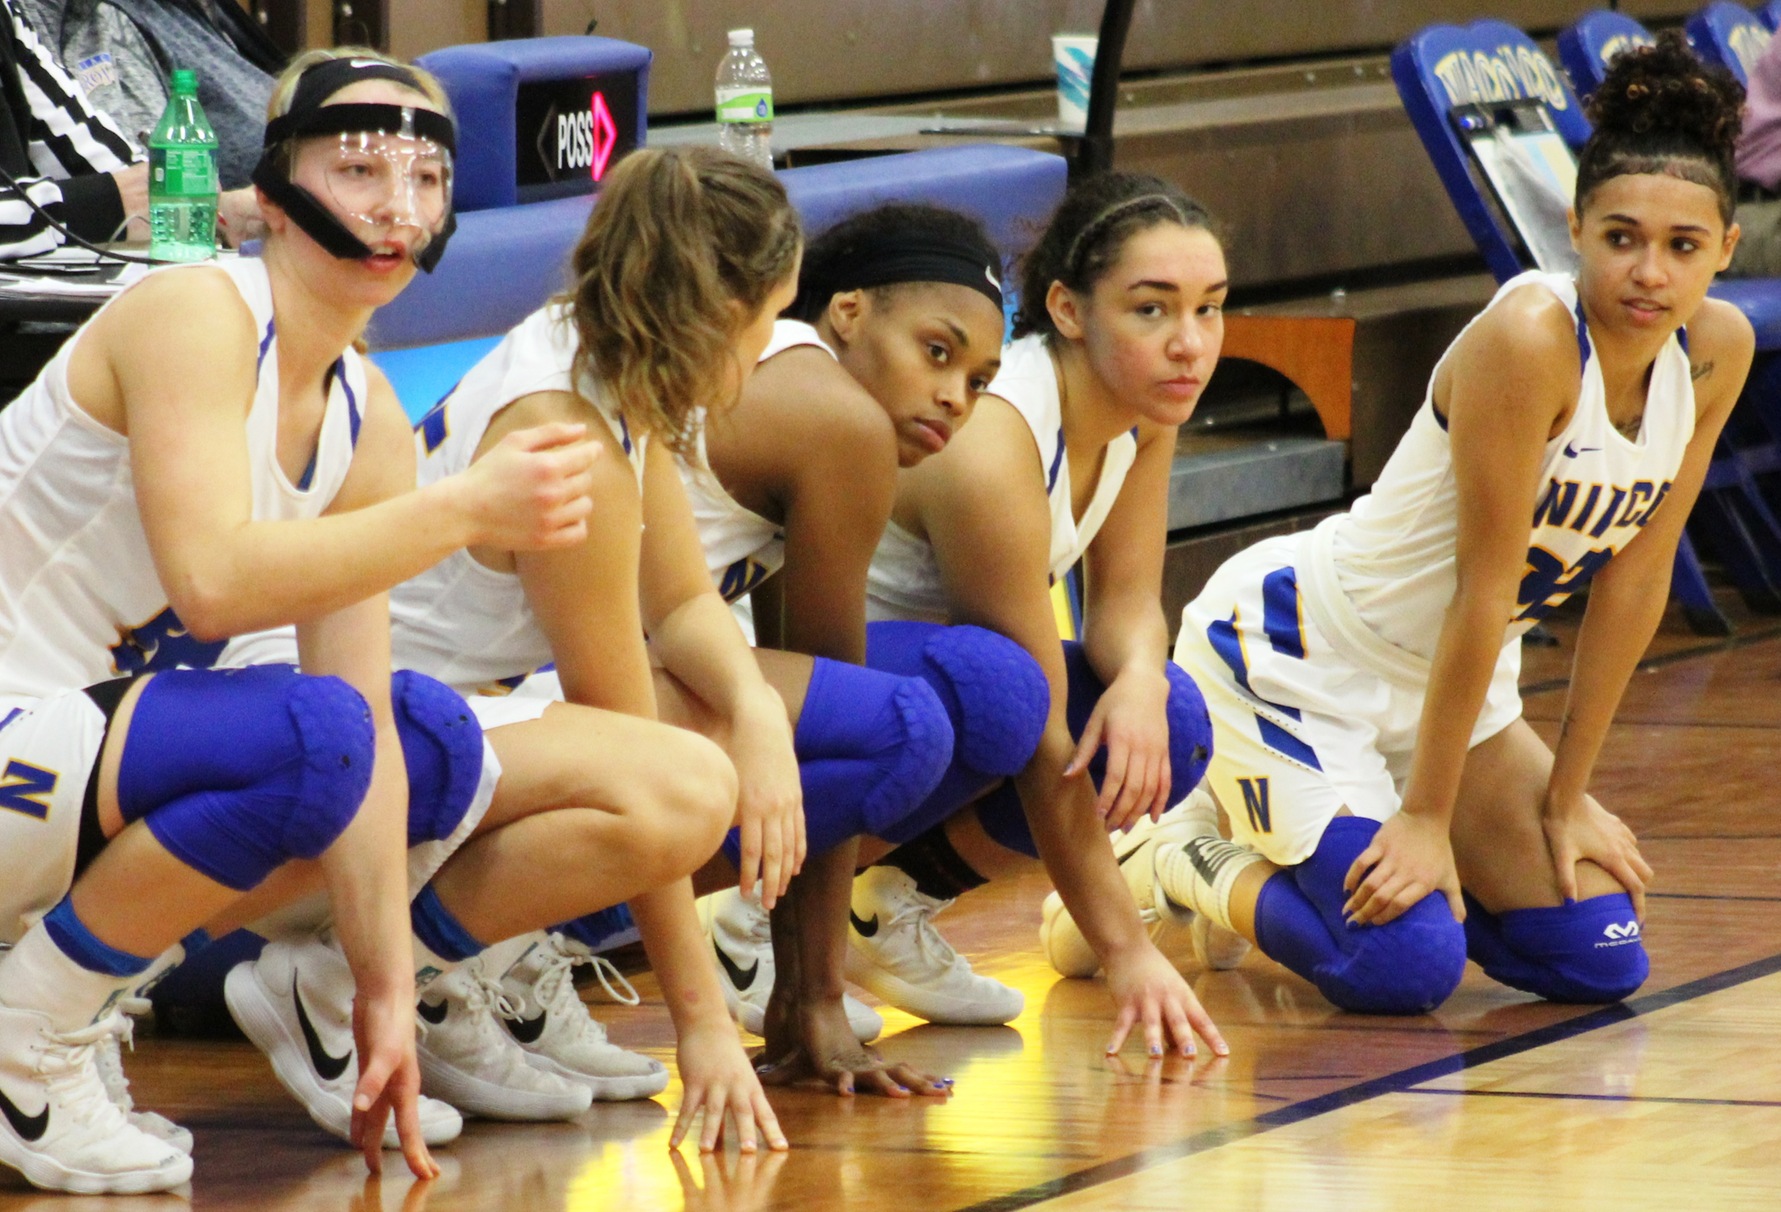 Five players get ready to check in during a November game against the Grand View JV in the NIACC gym.